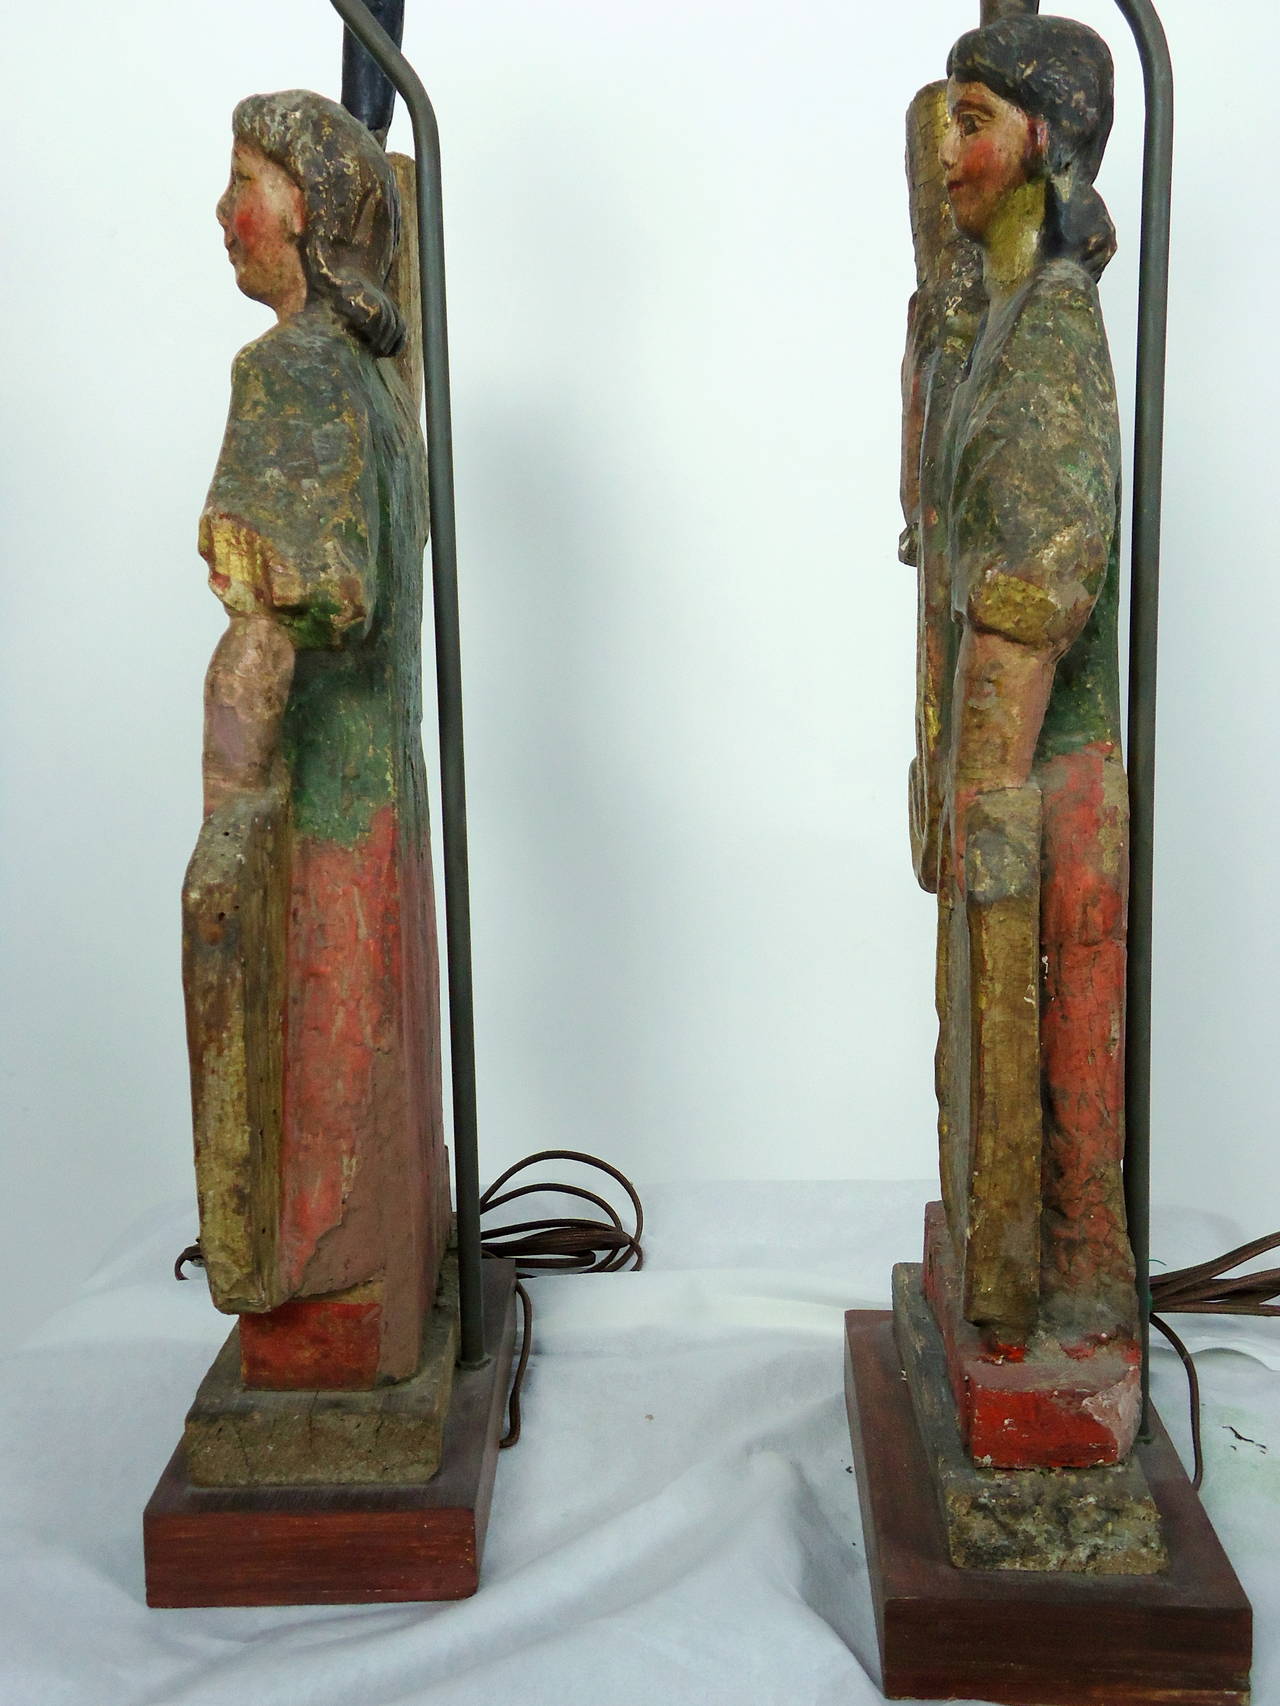 Unusual poly-chromed wooden figurative candleholders carved in Mexico in the late 18th to mid-19th century converted into table lamps, circa 1940.
The figures have had minor restoration over the last century and a half but retain much of their